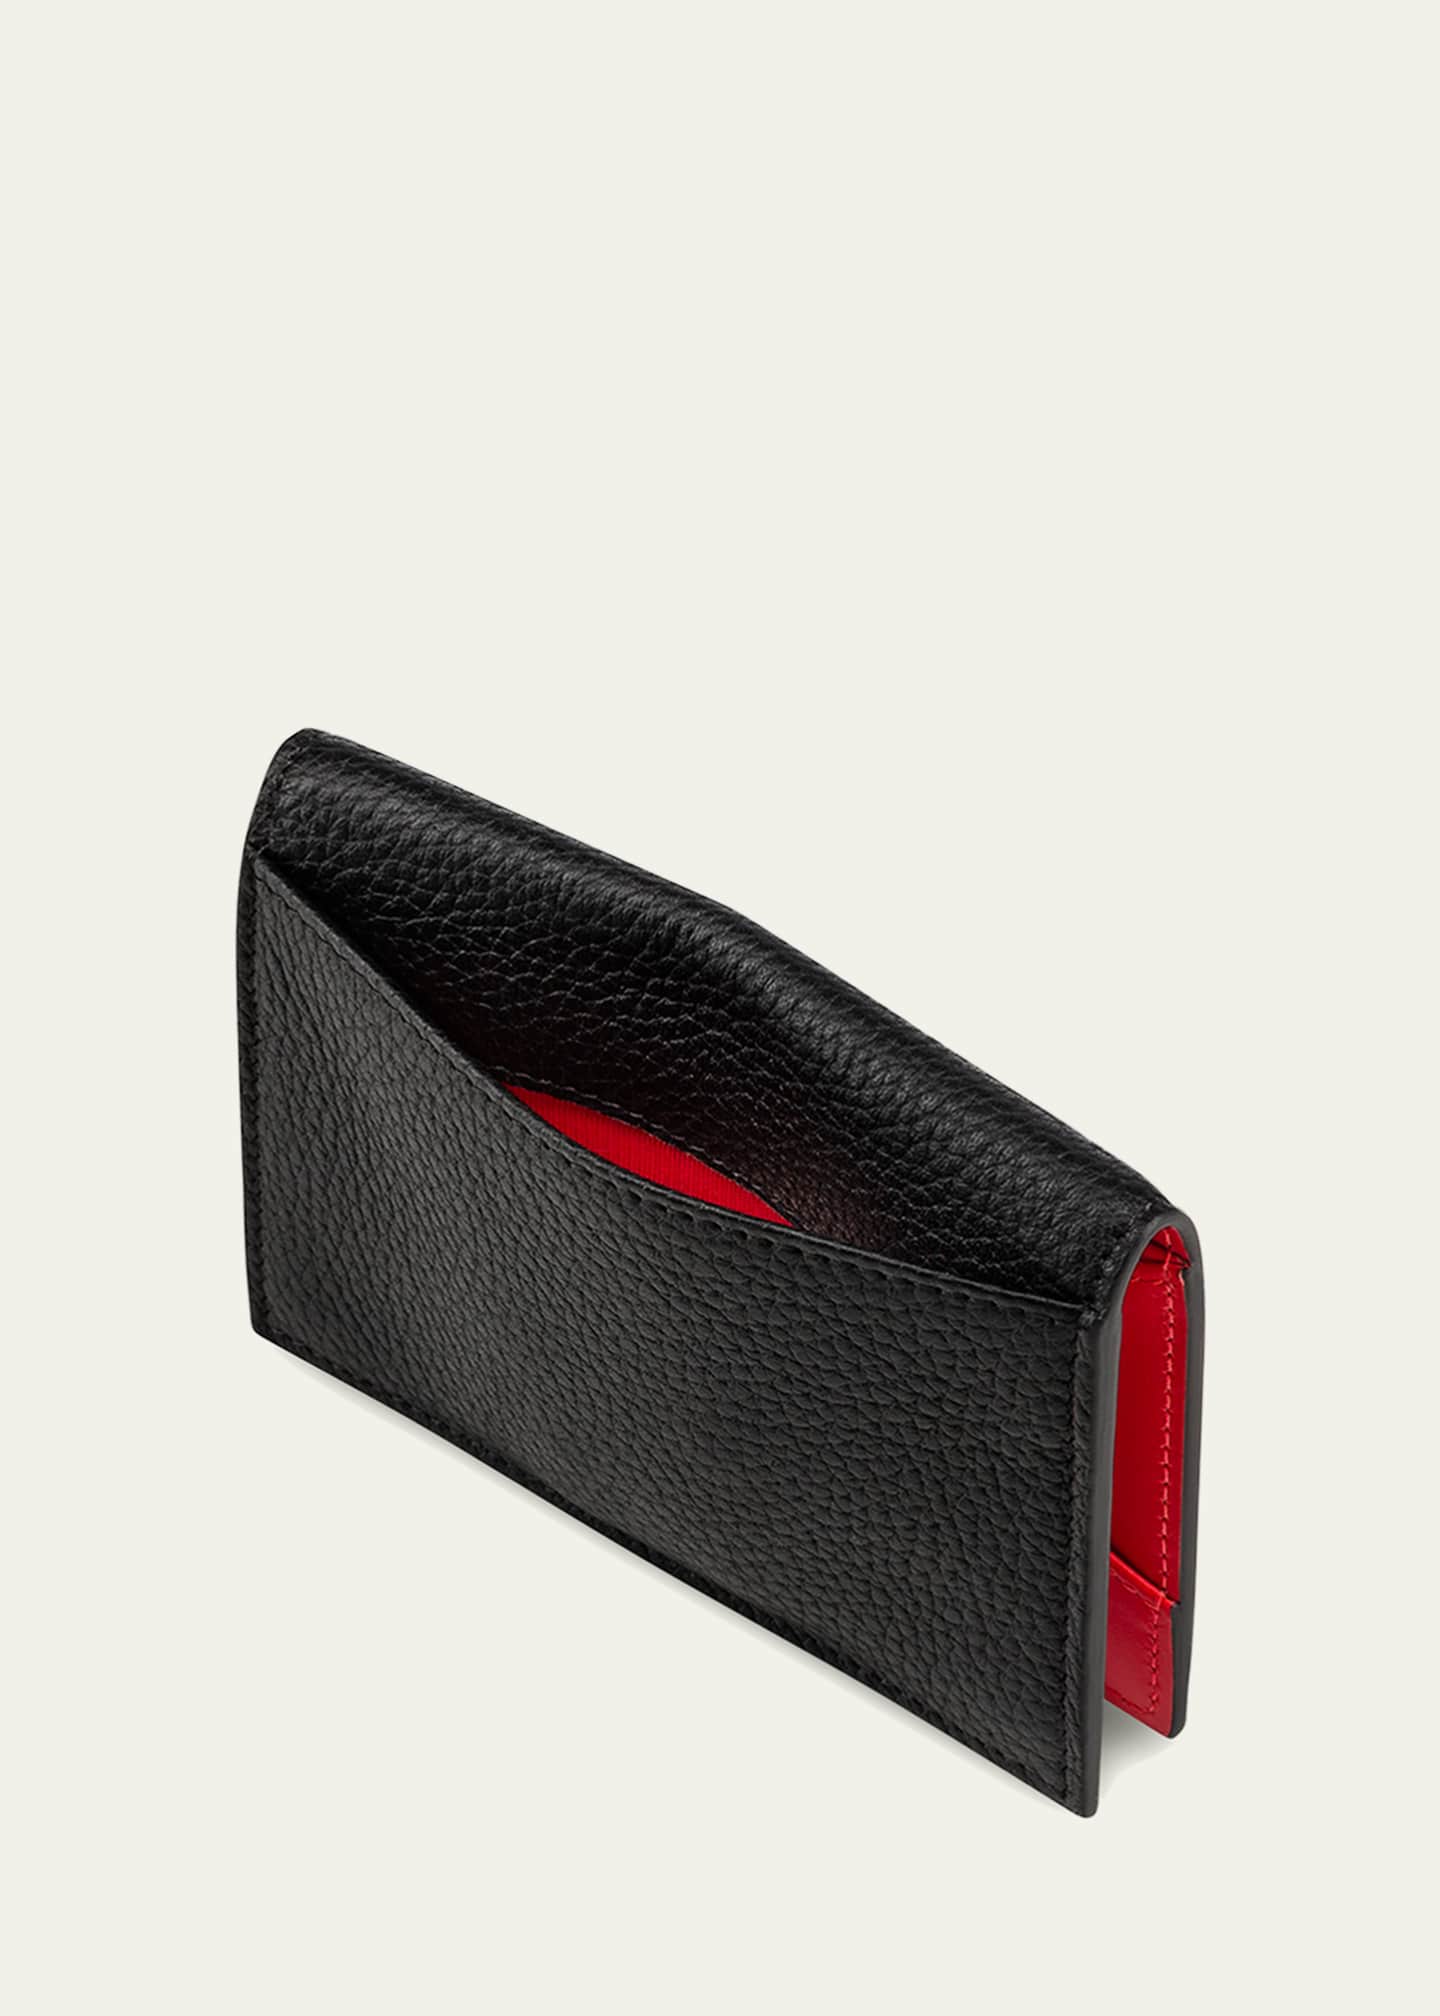 Christian Louboutin Men's Empire Two-Tone Leather Wallet Image 5 of 5